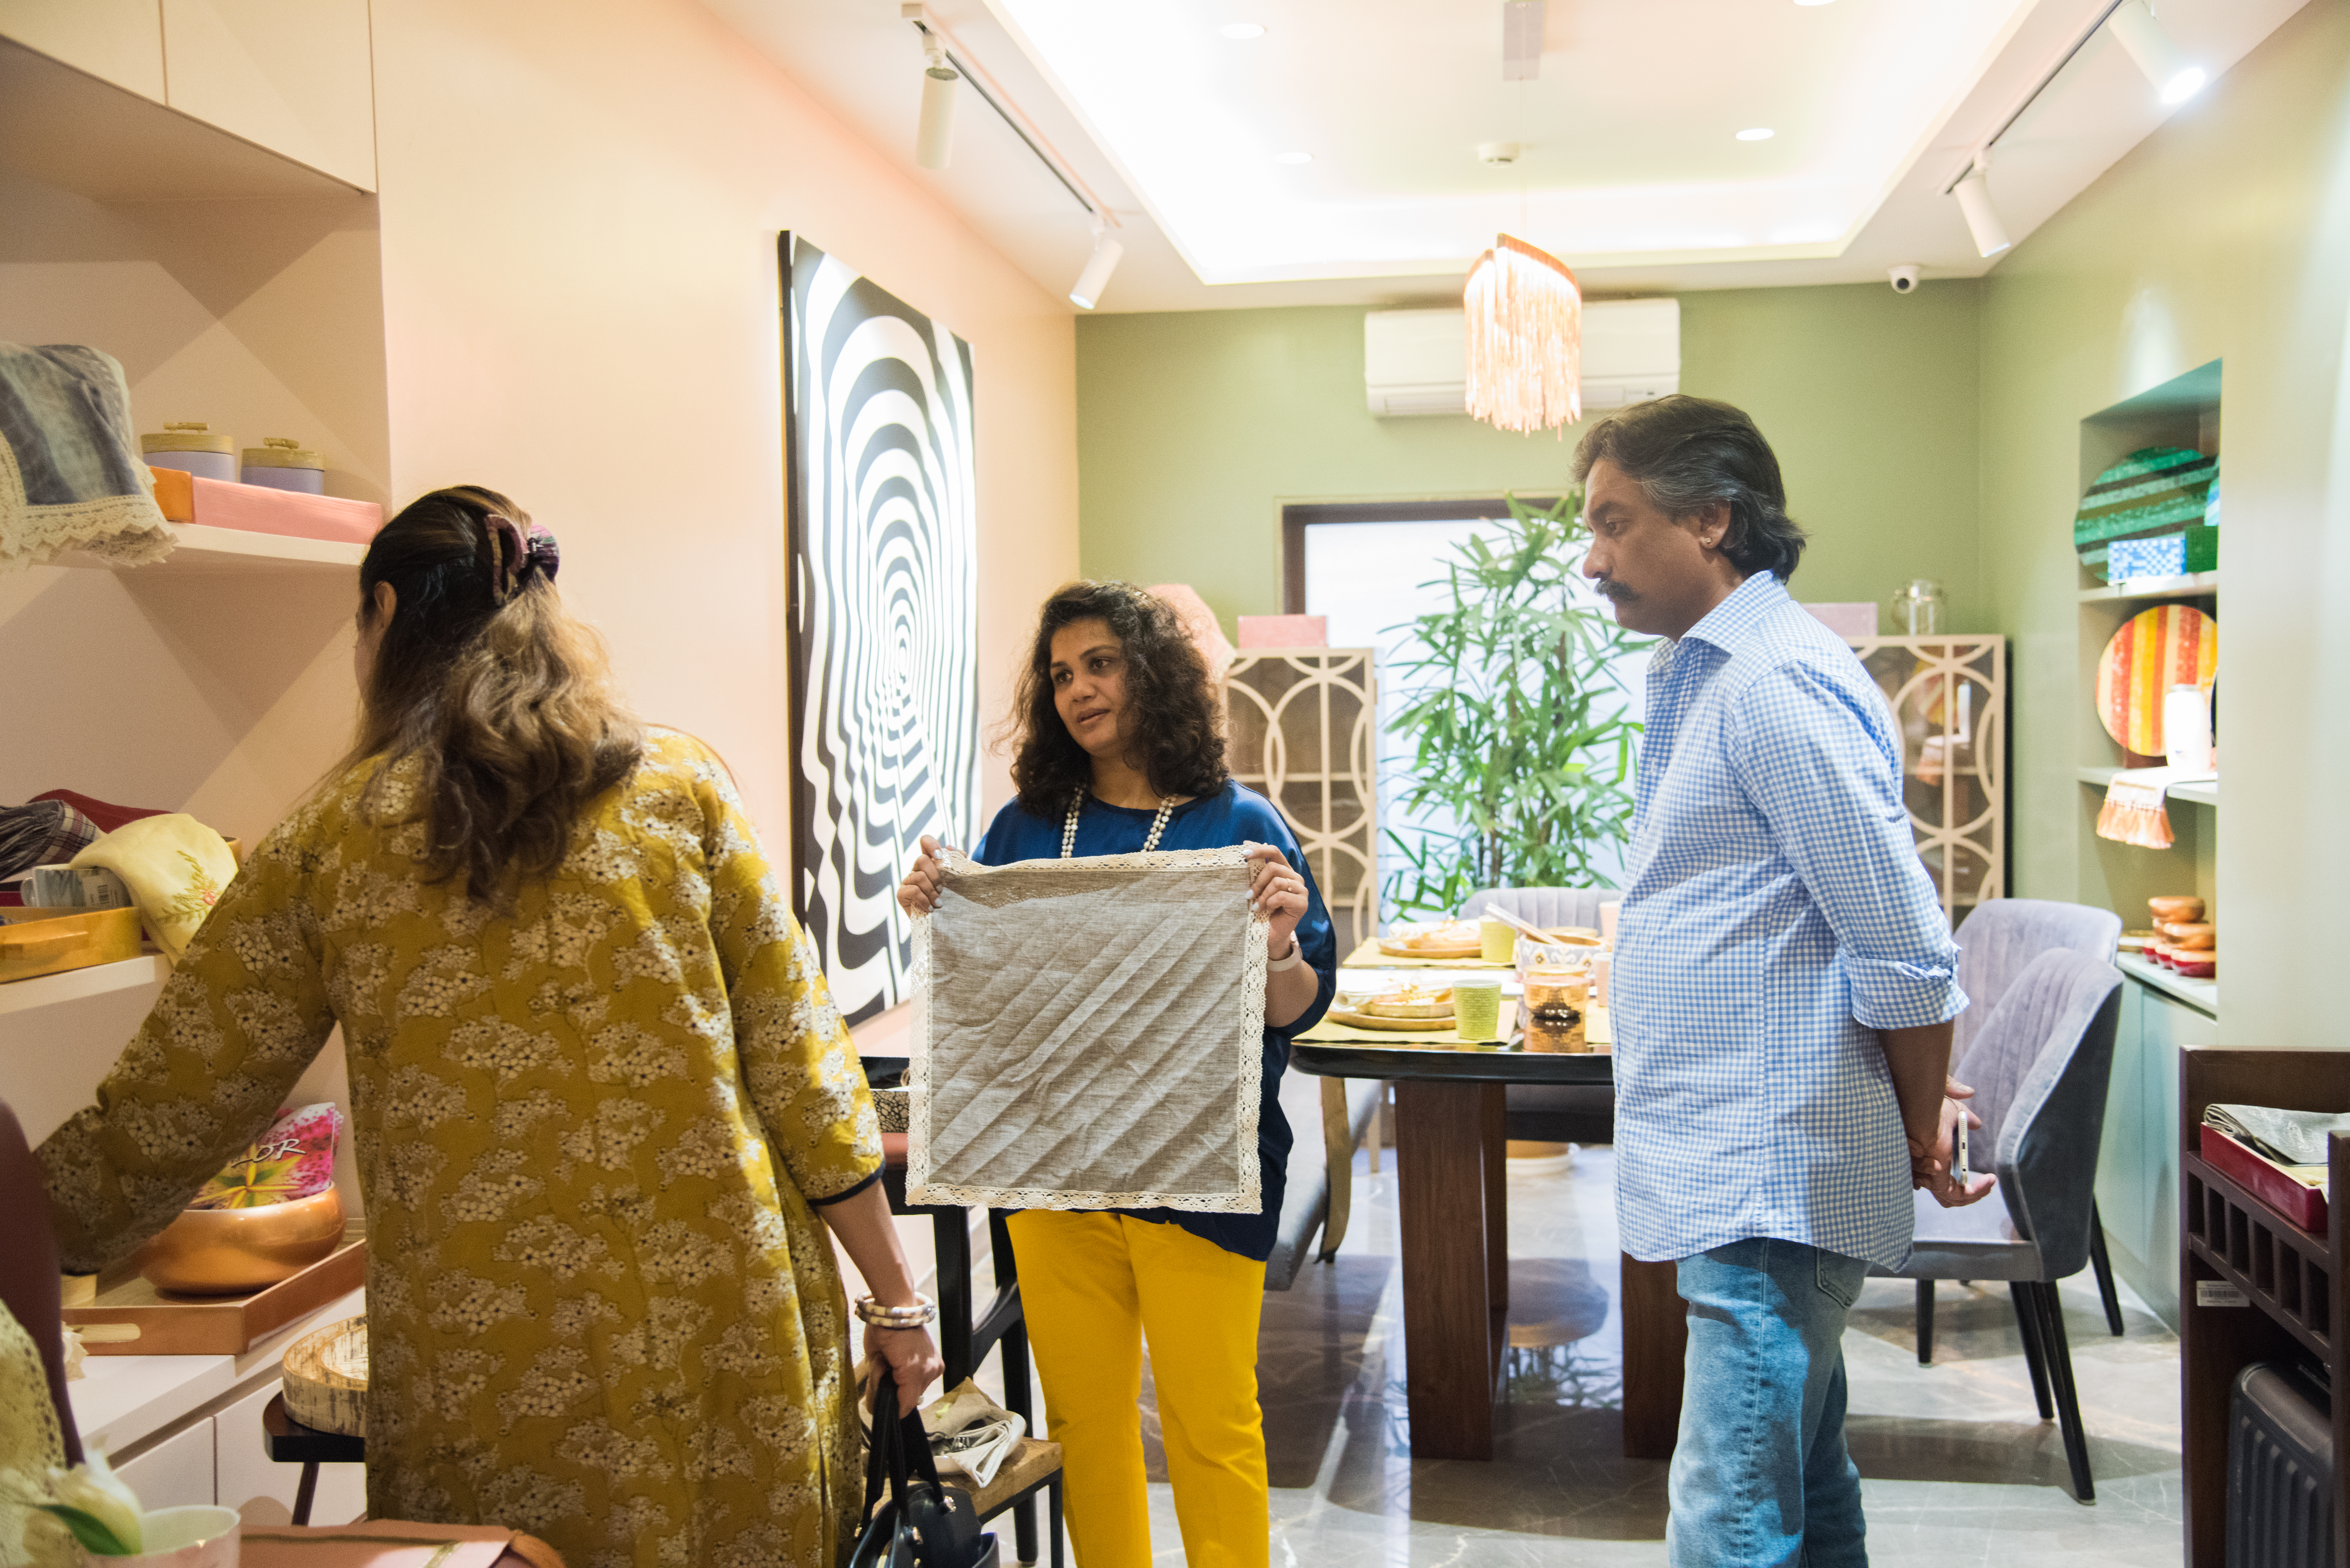 The festive season in the city began on a high note as Jaipur's most luxurious pre-festive trunk show, hosted by Hermosa Design Studio, kicked off with fervor last Thursday.